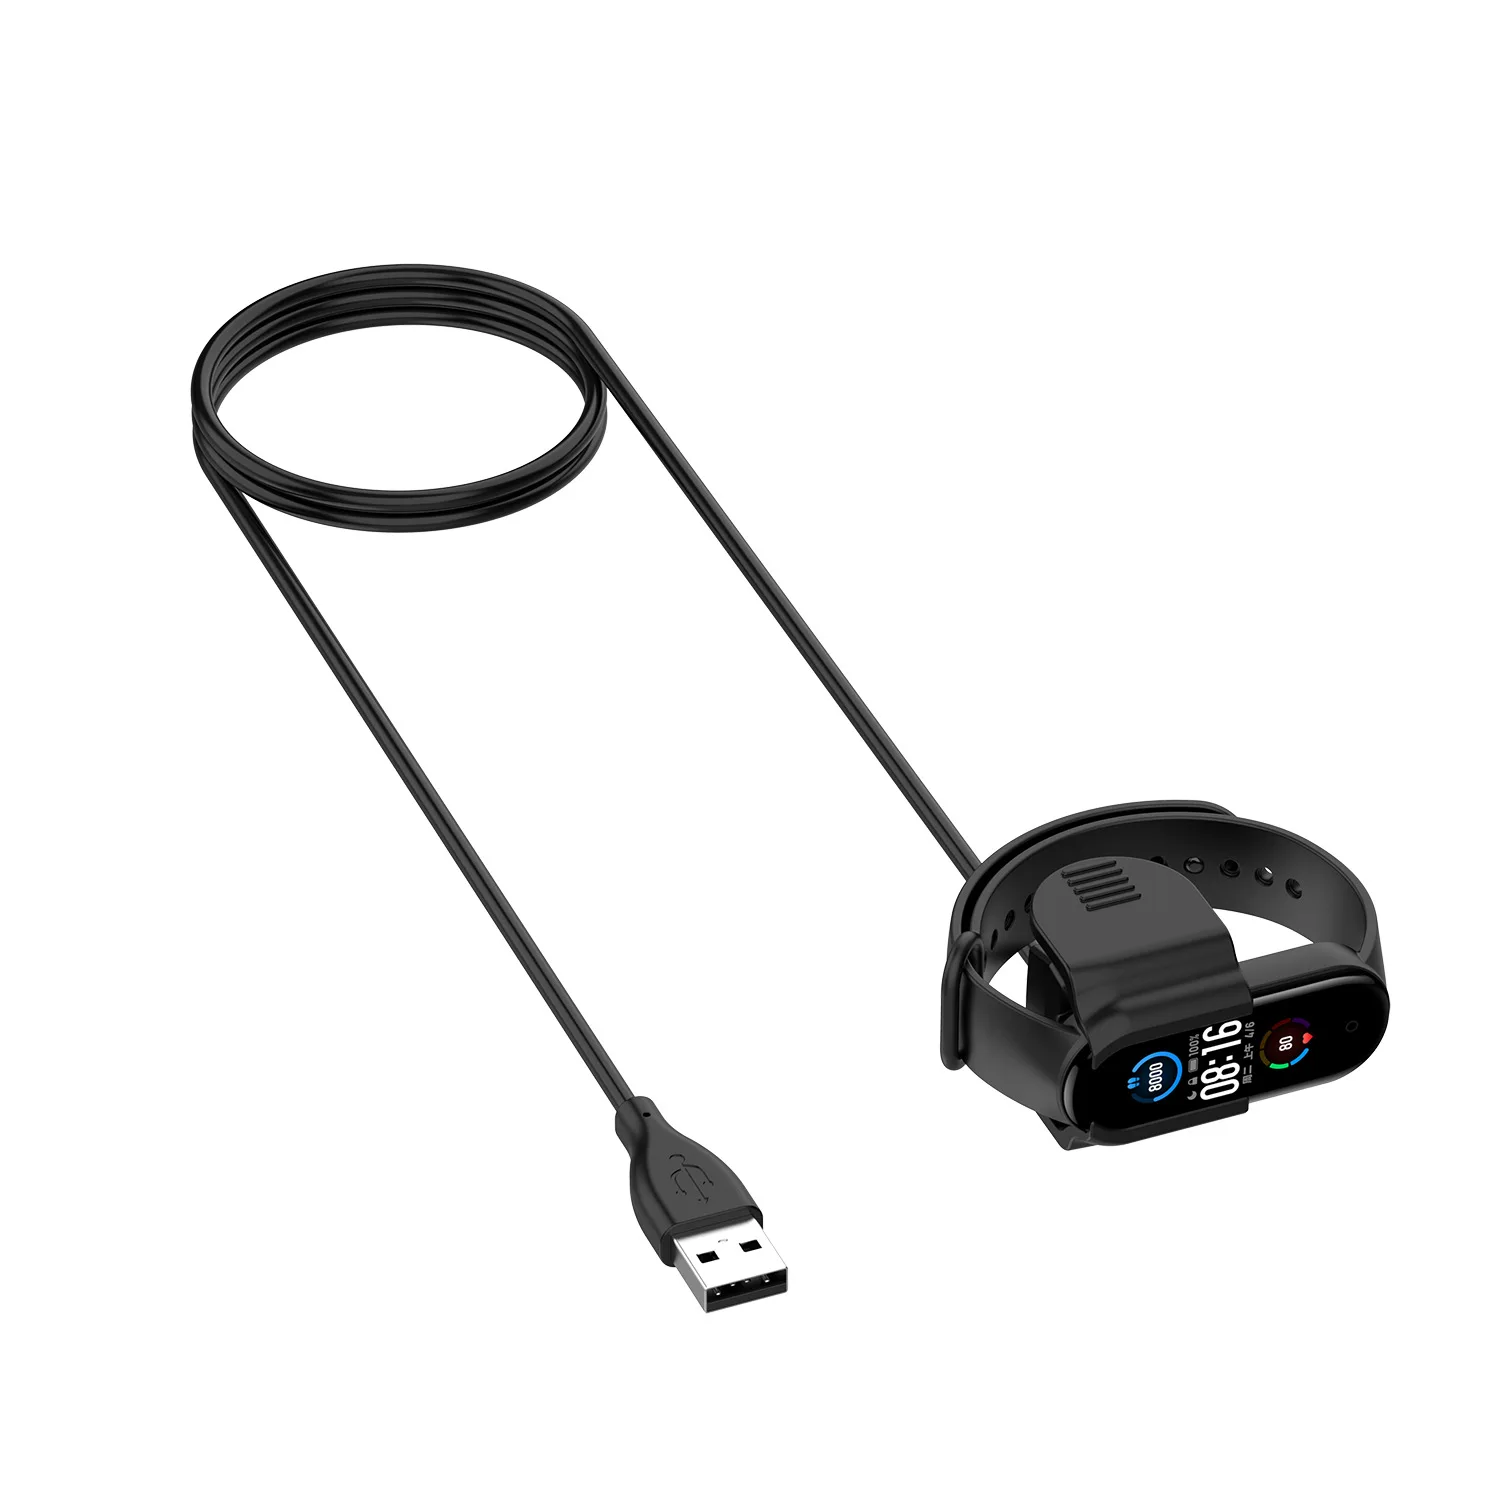 

USB Charging Cable Cord Dock Charger Adapter Replacement For Xiaomi Mi Band 5 Band5 Miband 5 Smart Band Wristband Bracelet